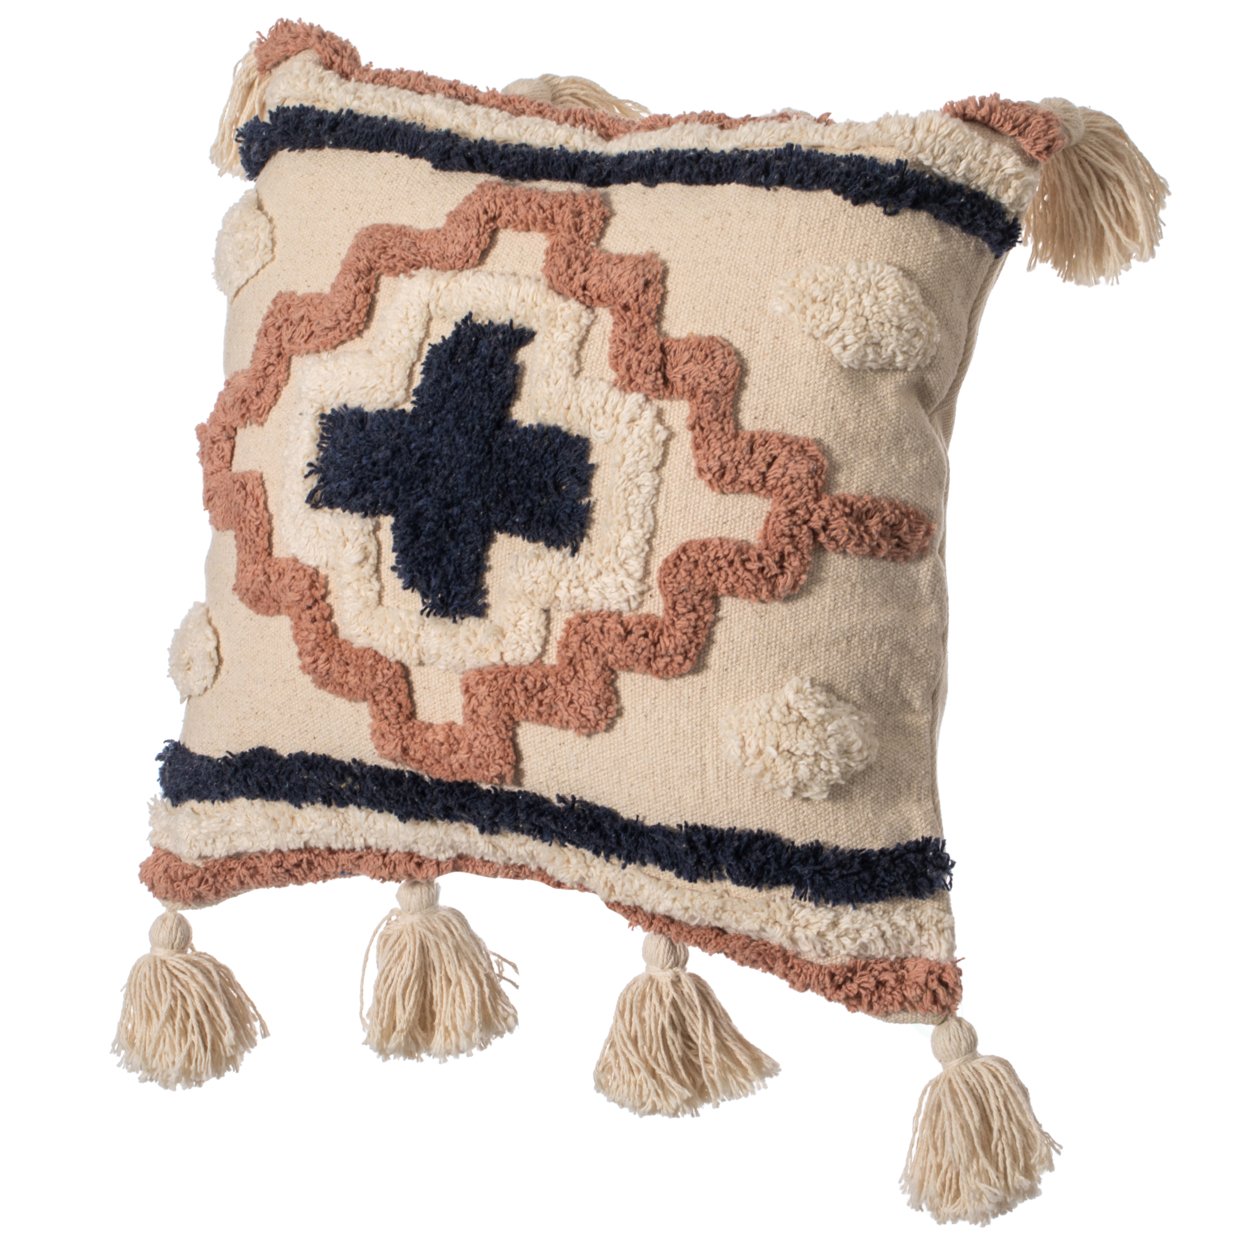 16 Handwoven Cotton Throw Pillow Cover With Tufted Designs And Side Tassels - Geometric